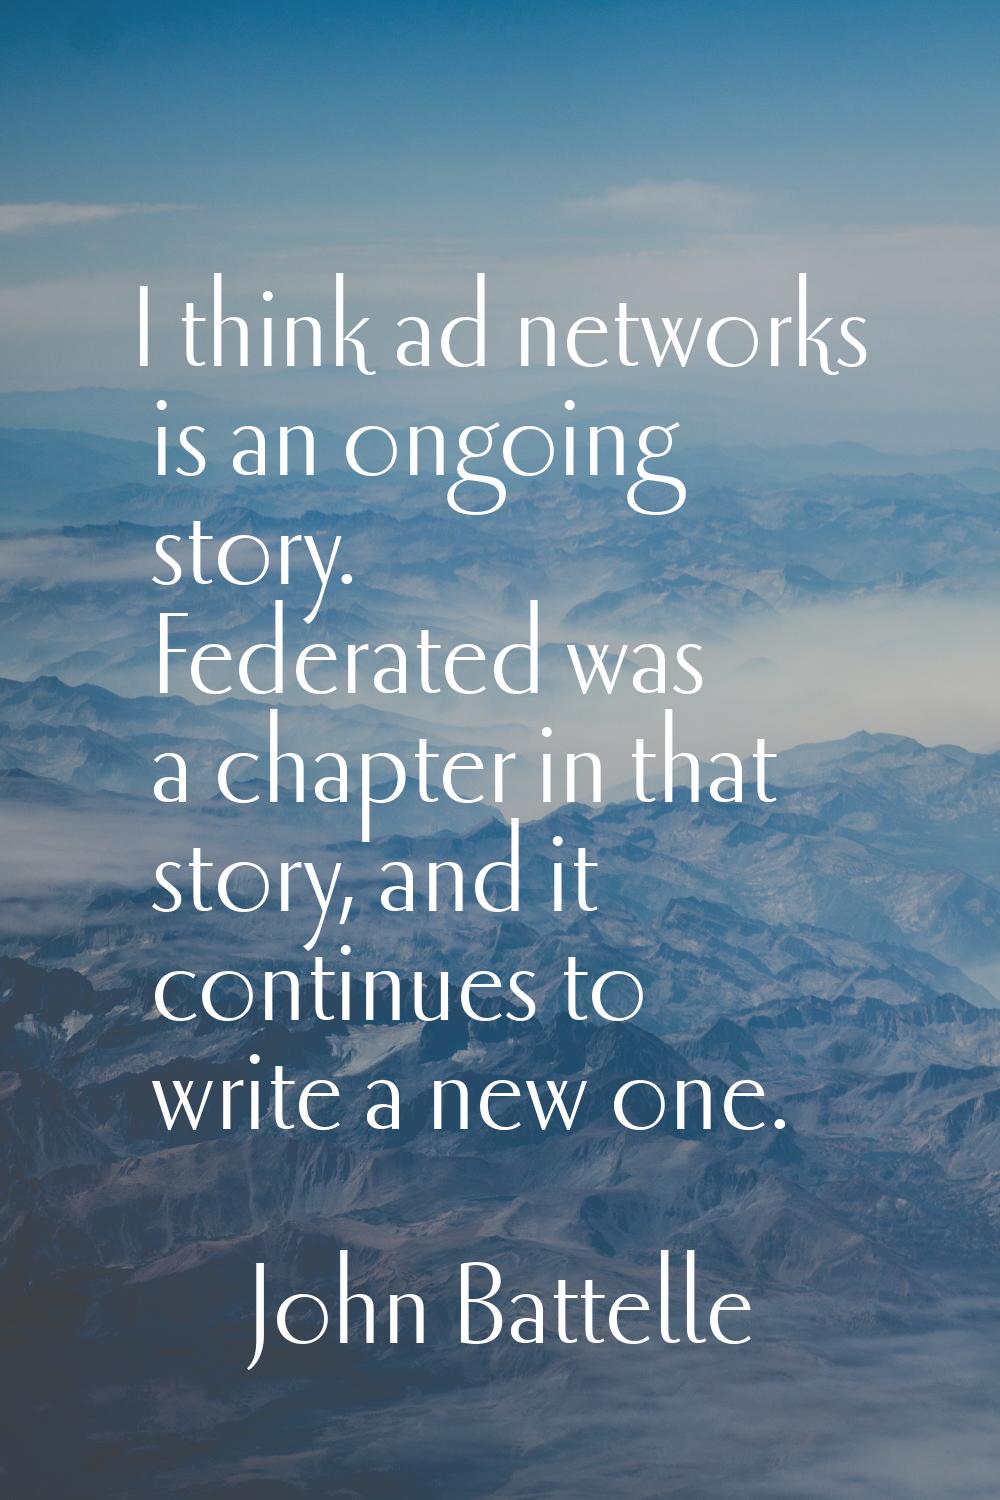 I think ad networks is an ongoing story. Federated was a chapter in that story, and it continues to